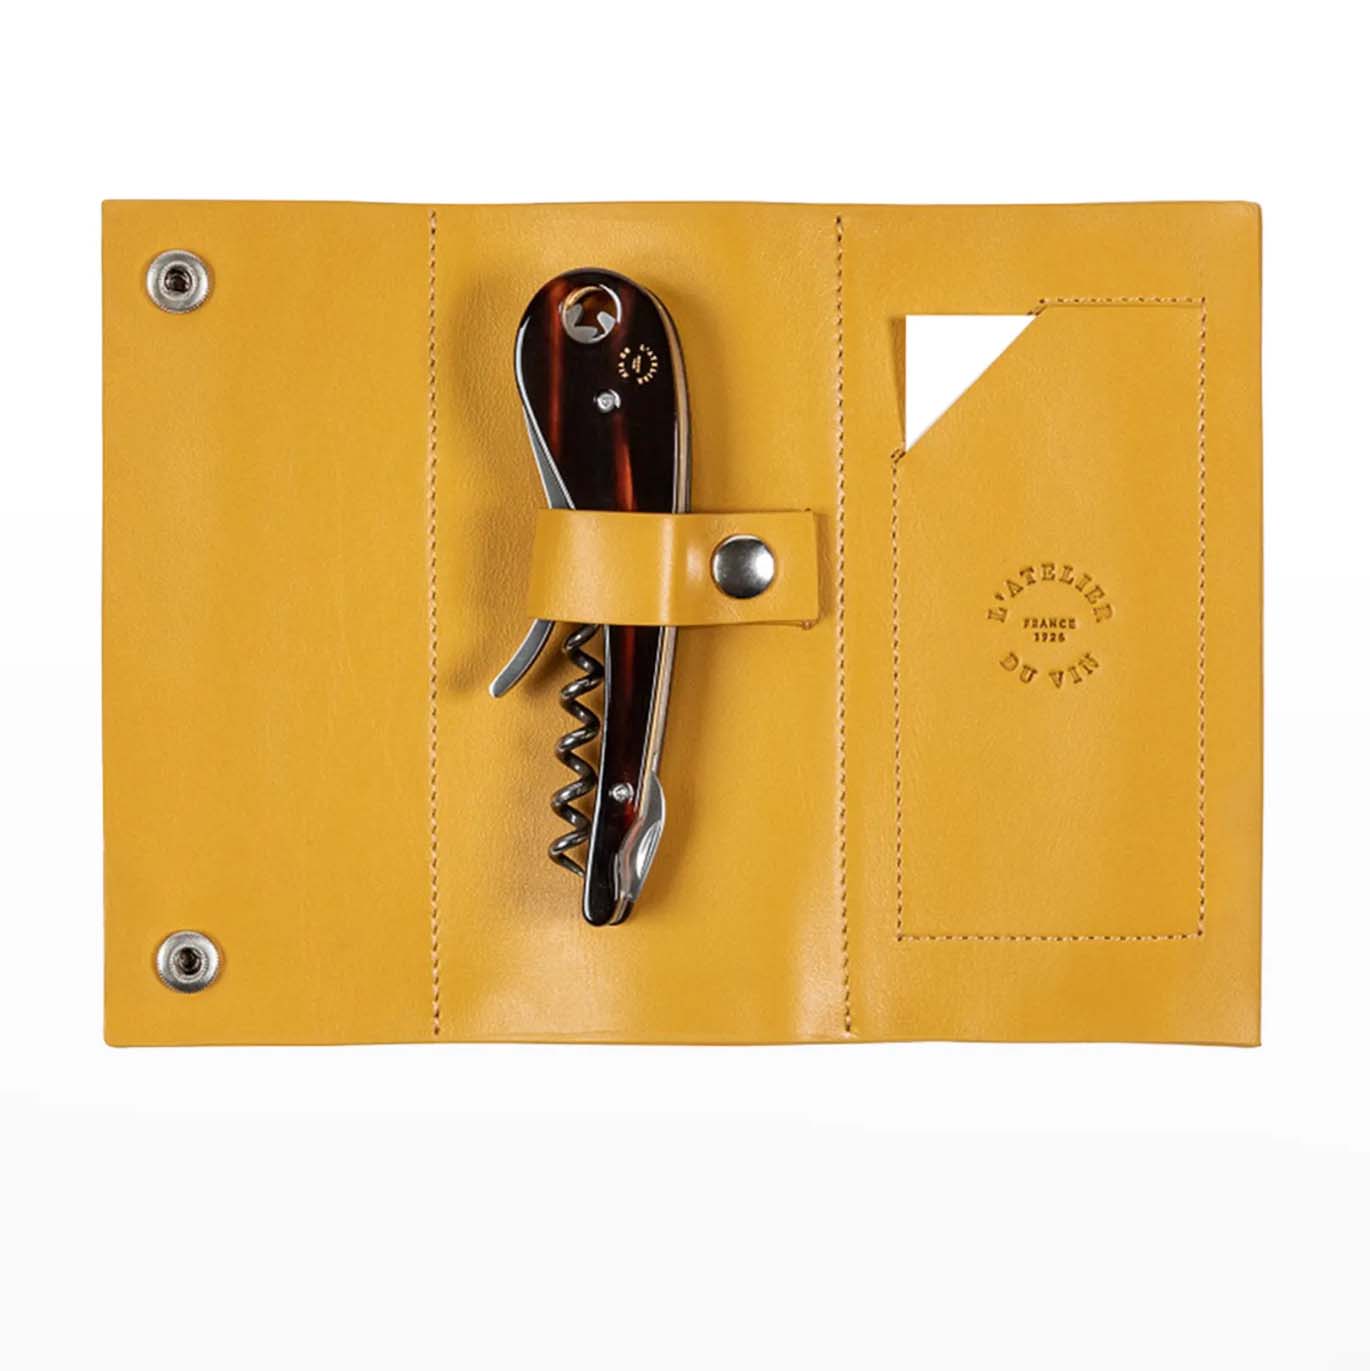 Bottle opener in yellow leather casing